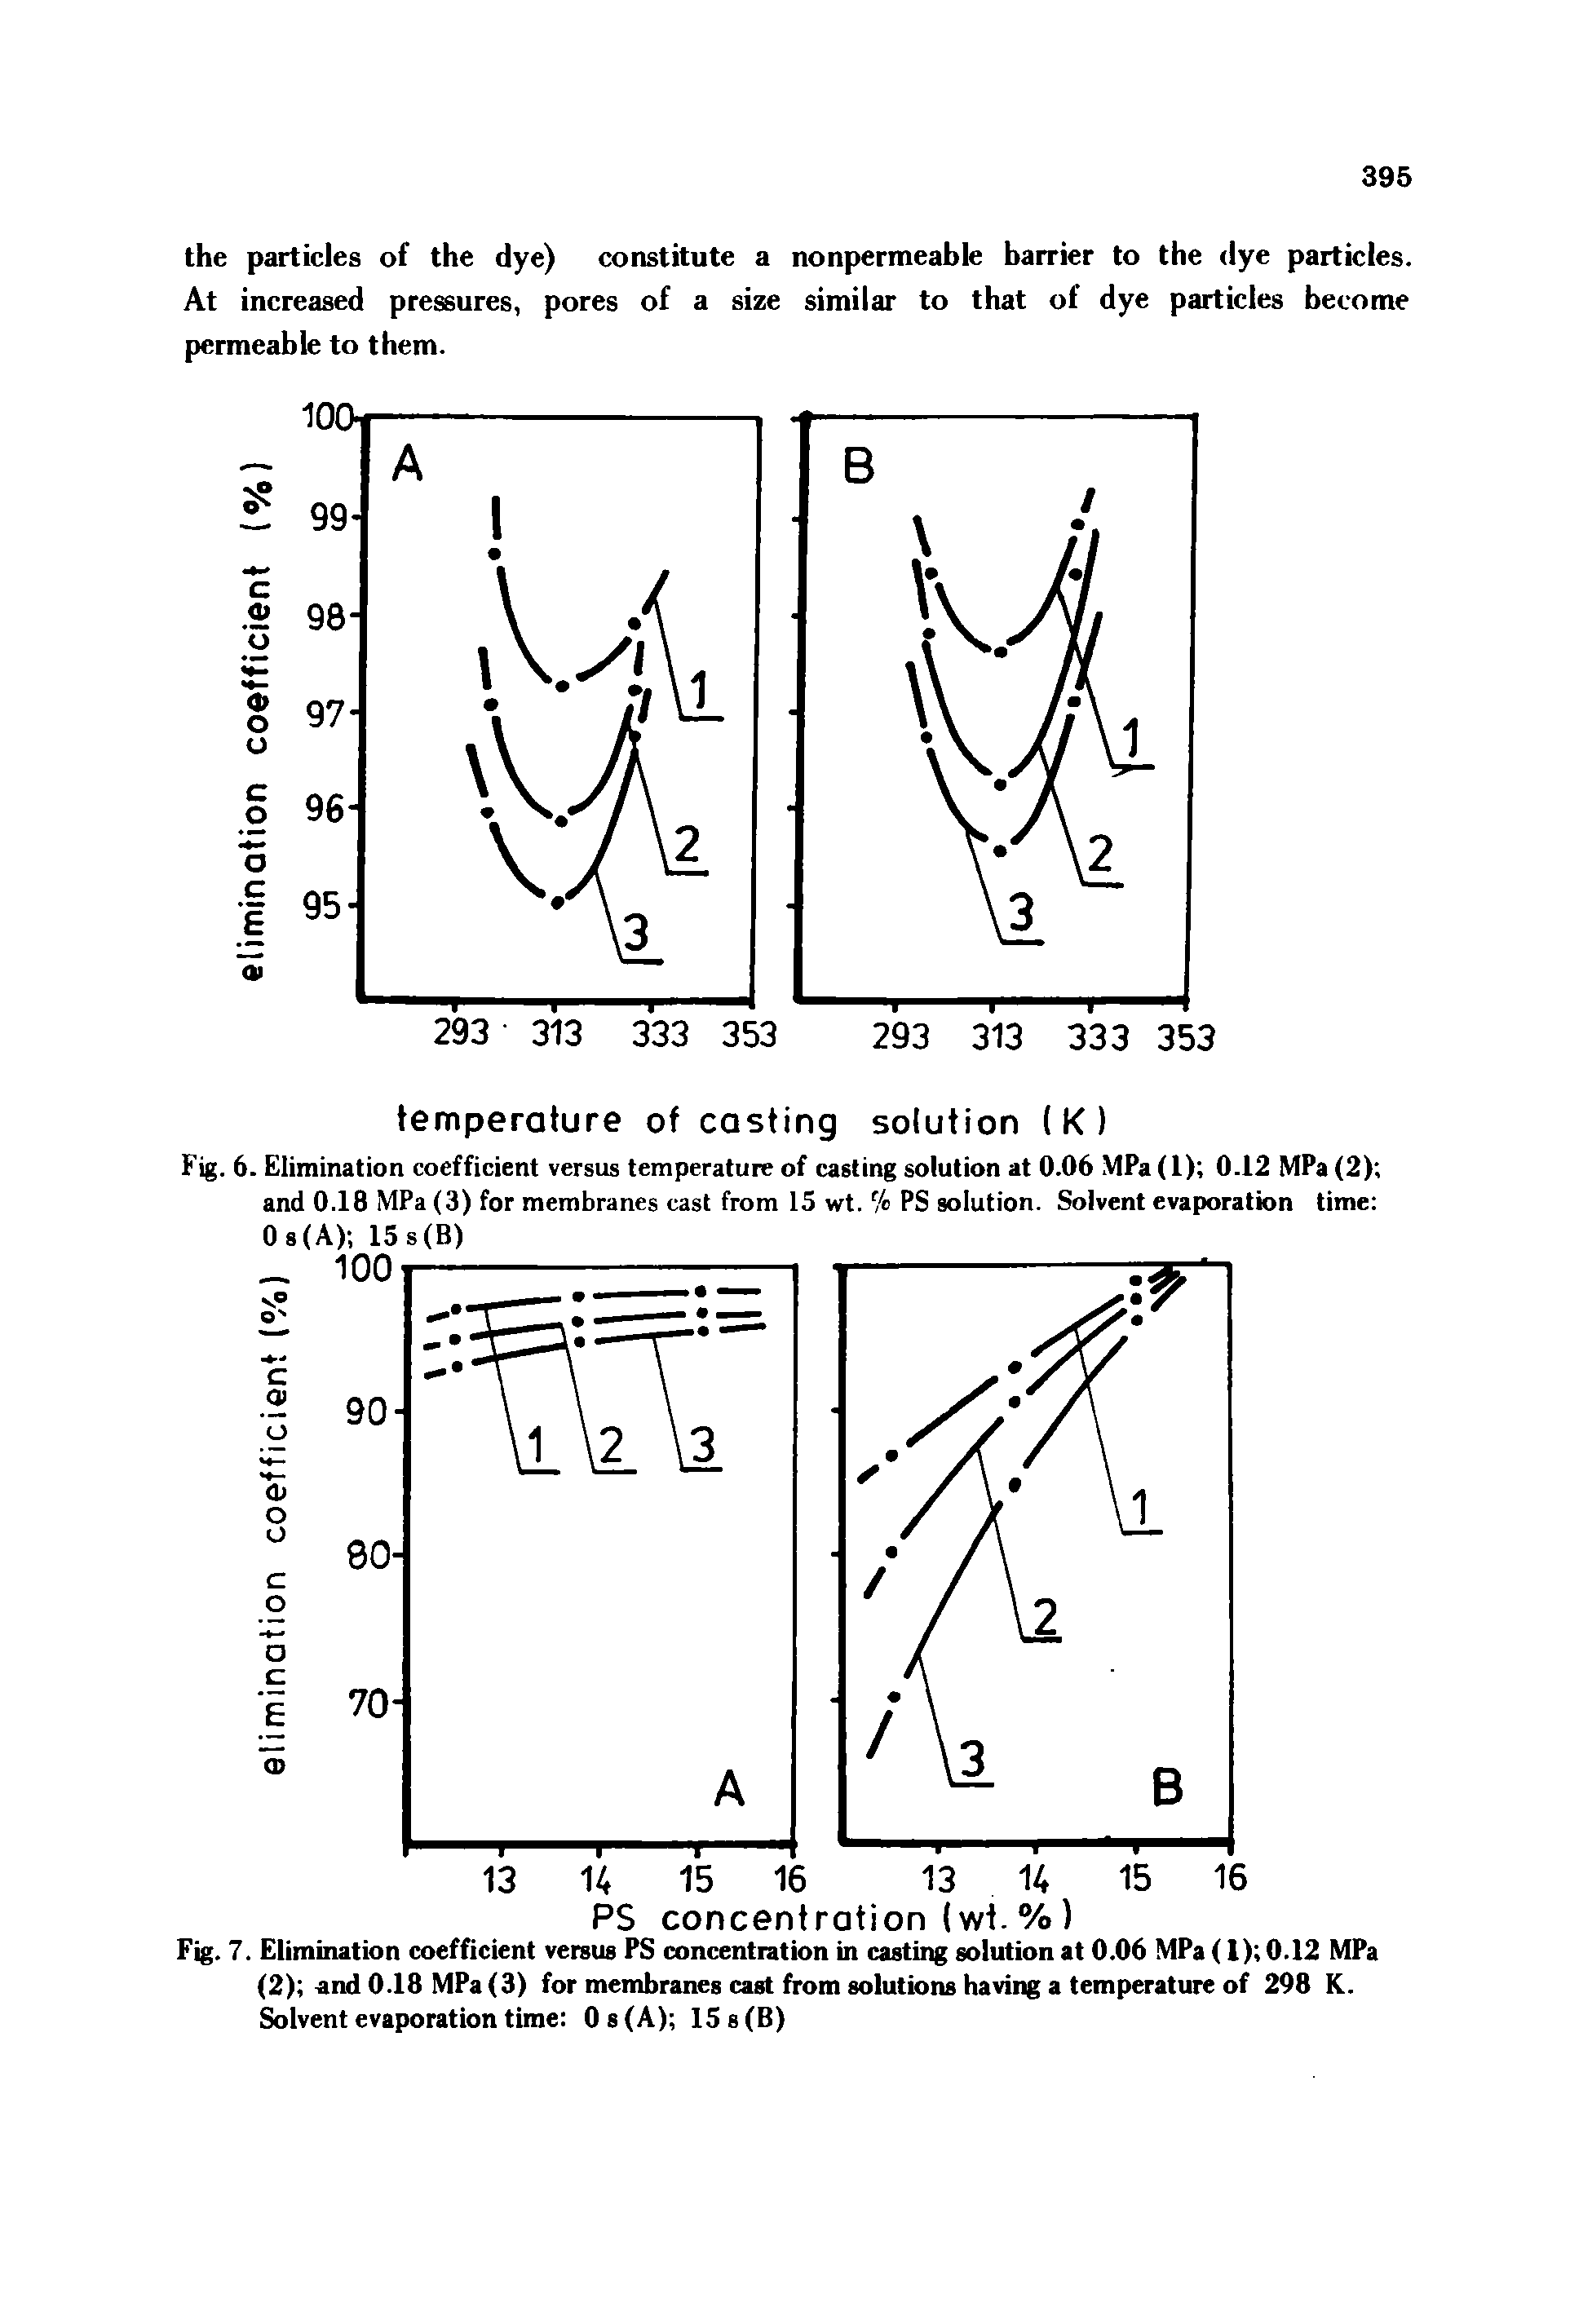 Fig. 6. Elimination coefficient versus temperature of casting solution at 0.06 MPa (1) 0.12 MPa (2) and 0.18 MPa (3) for membranes cast from 15 wt. % PS solution. Solvent evaporation time Os (A) 15s(B)...